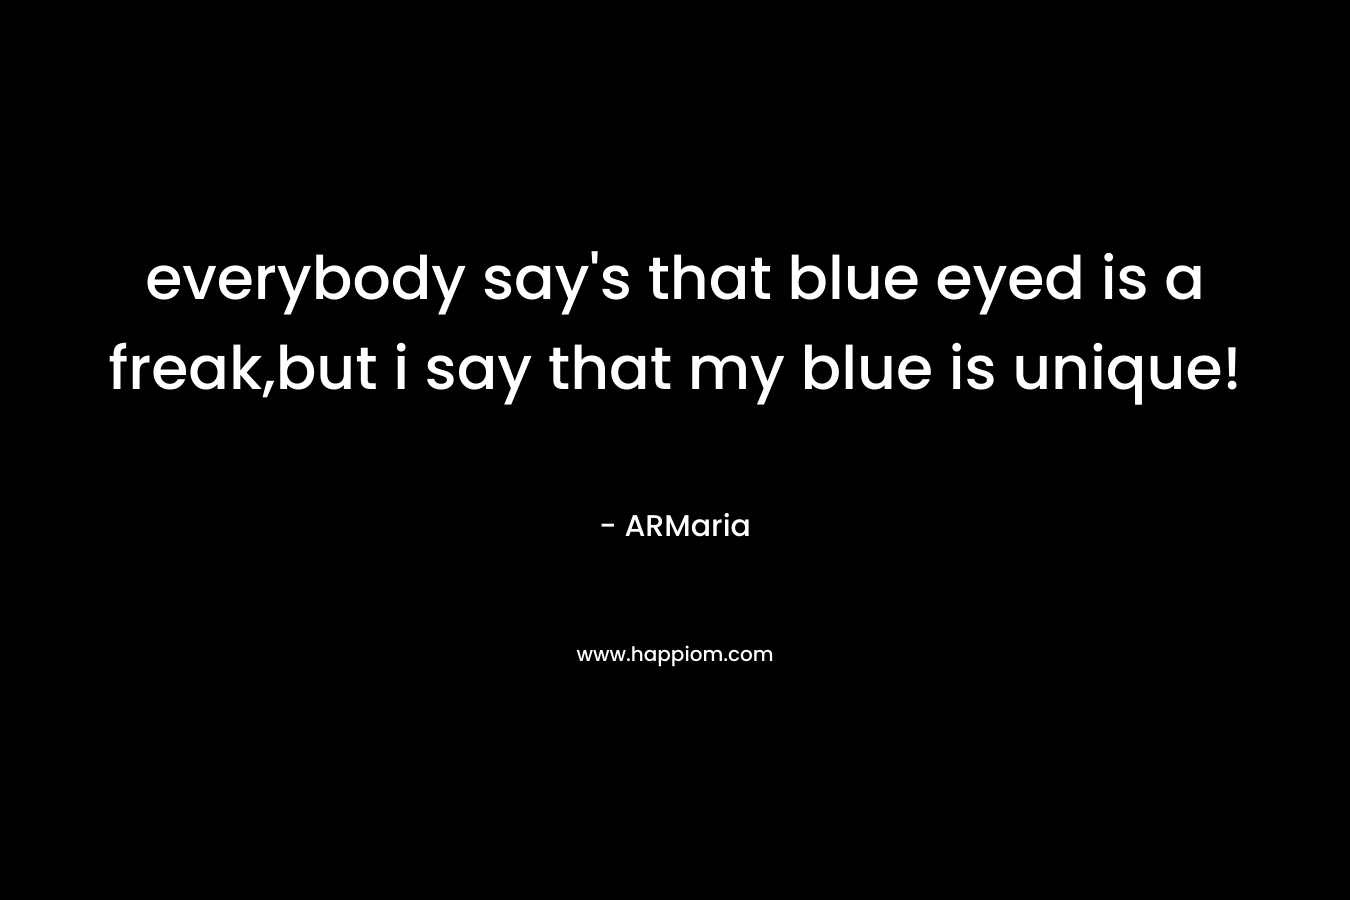 everybody say's that blue eyed is a freak,but i say that my blue is unique!